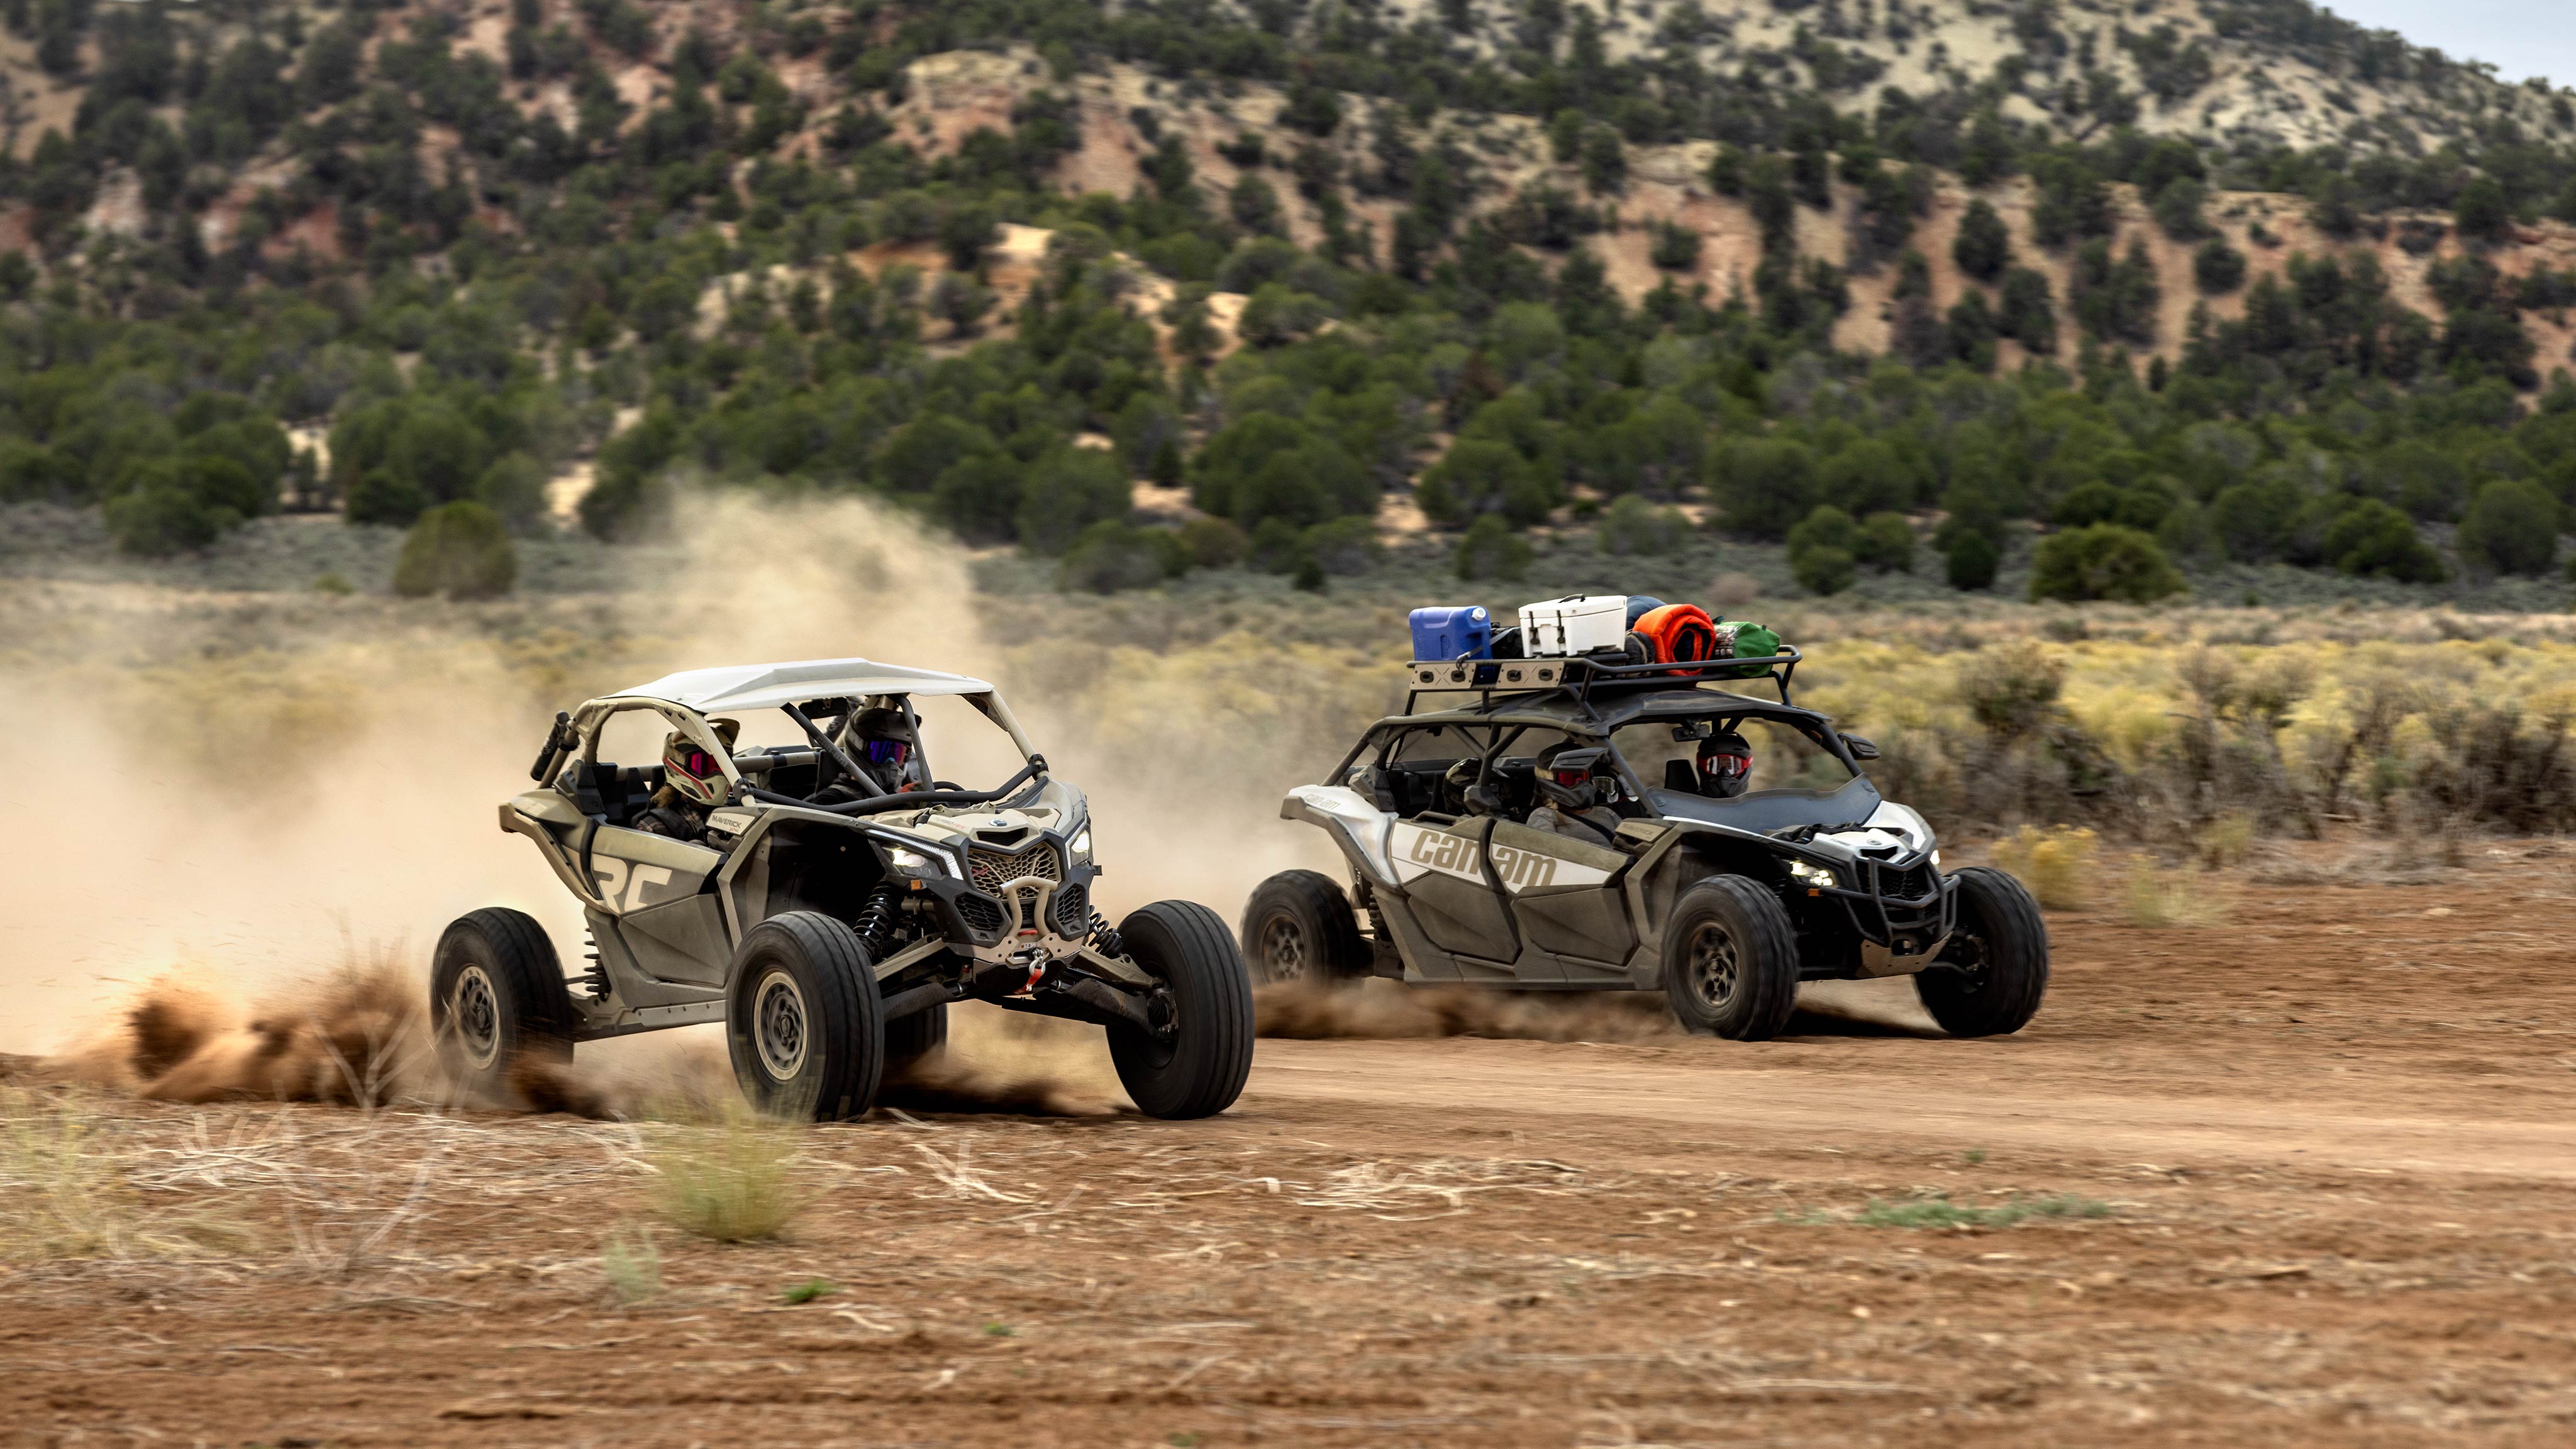 Two Can-Am side-by-sides in motion